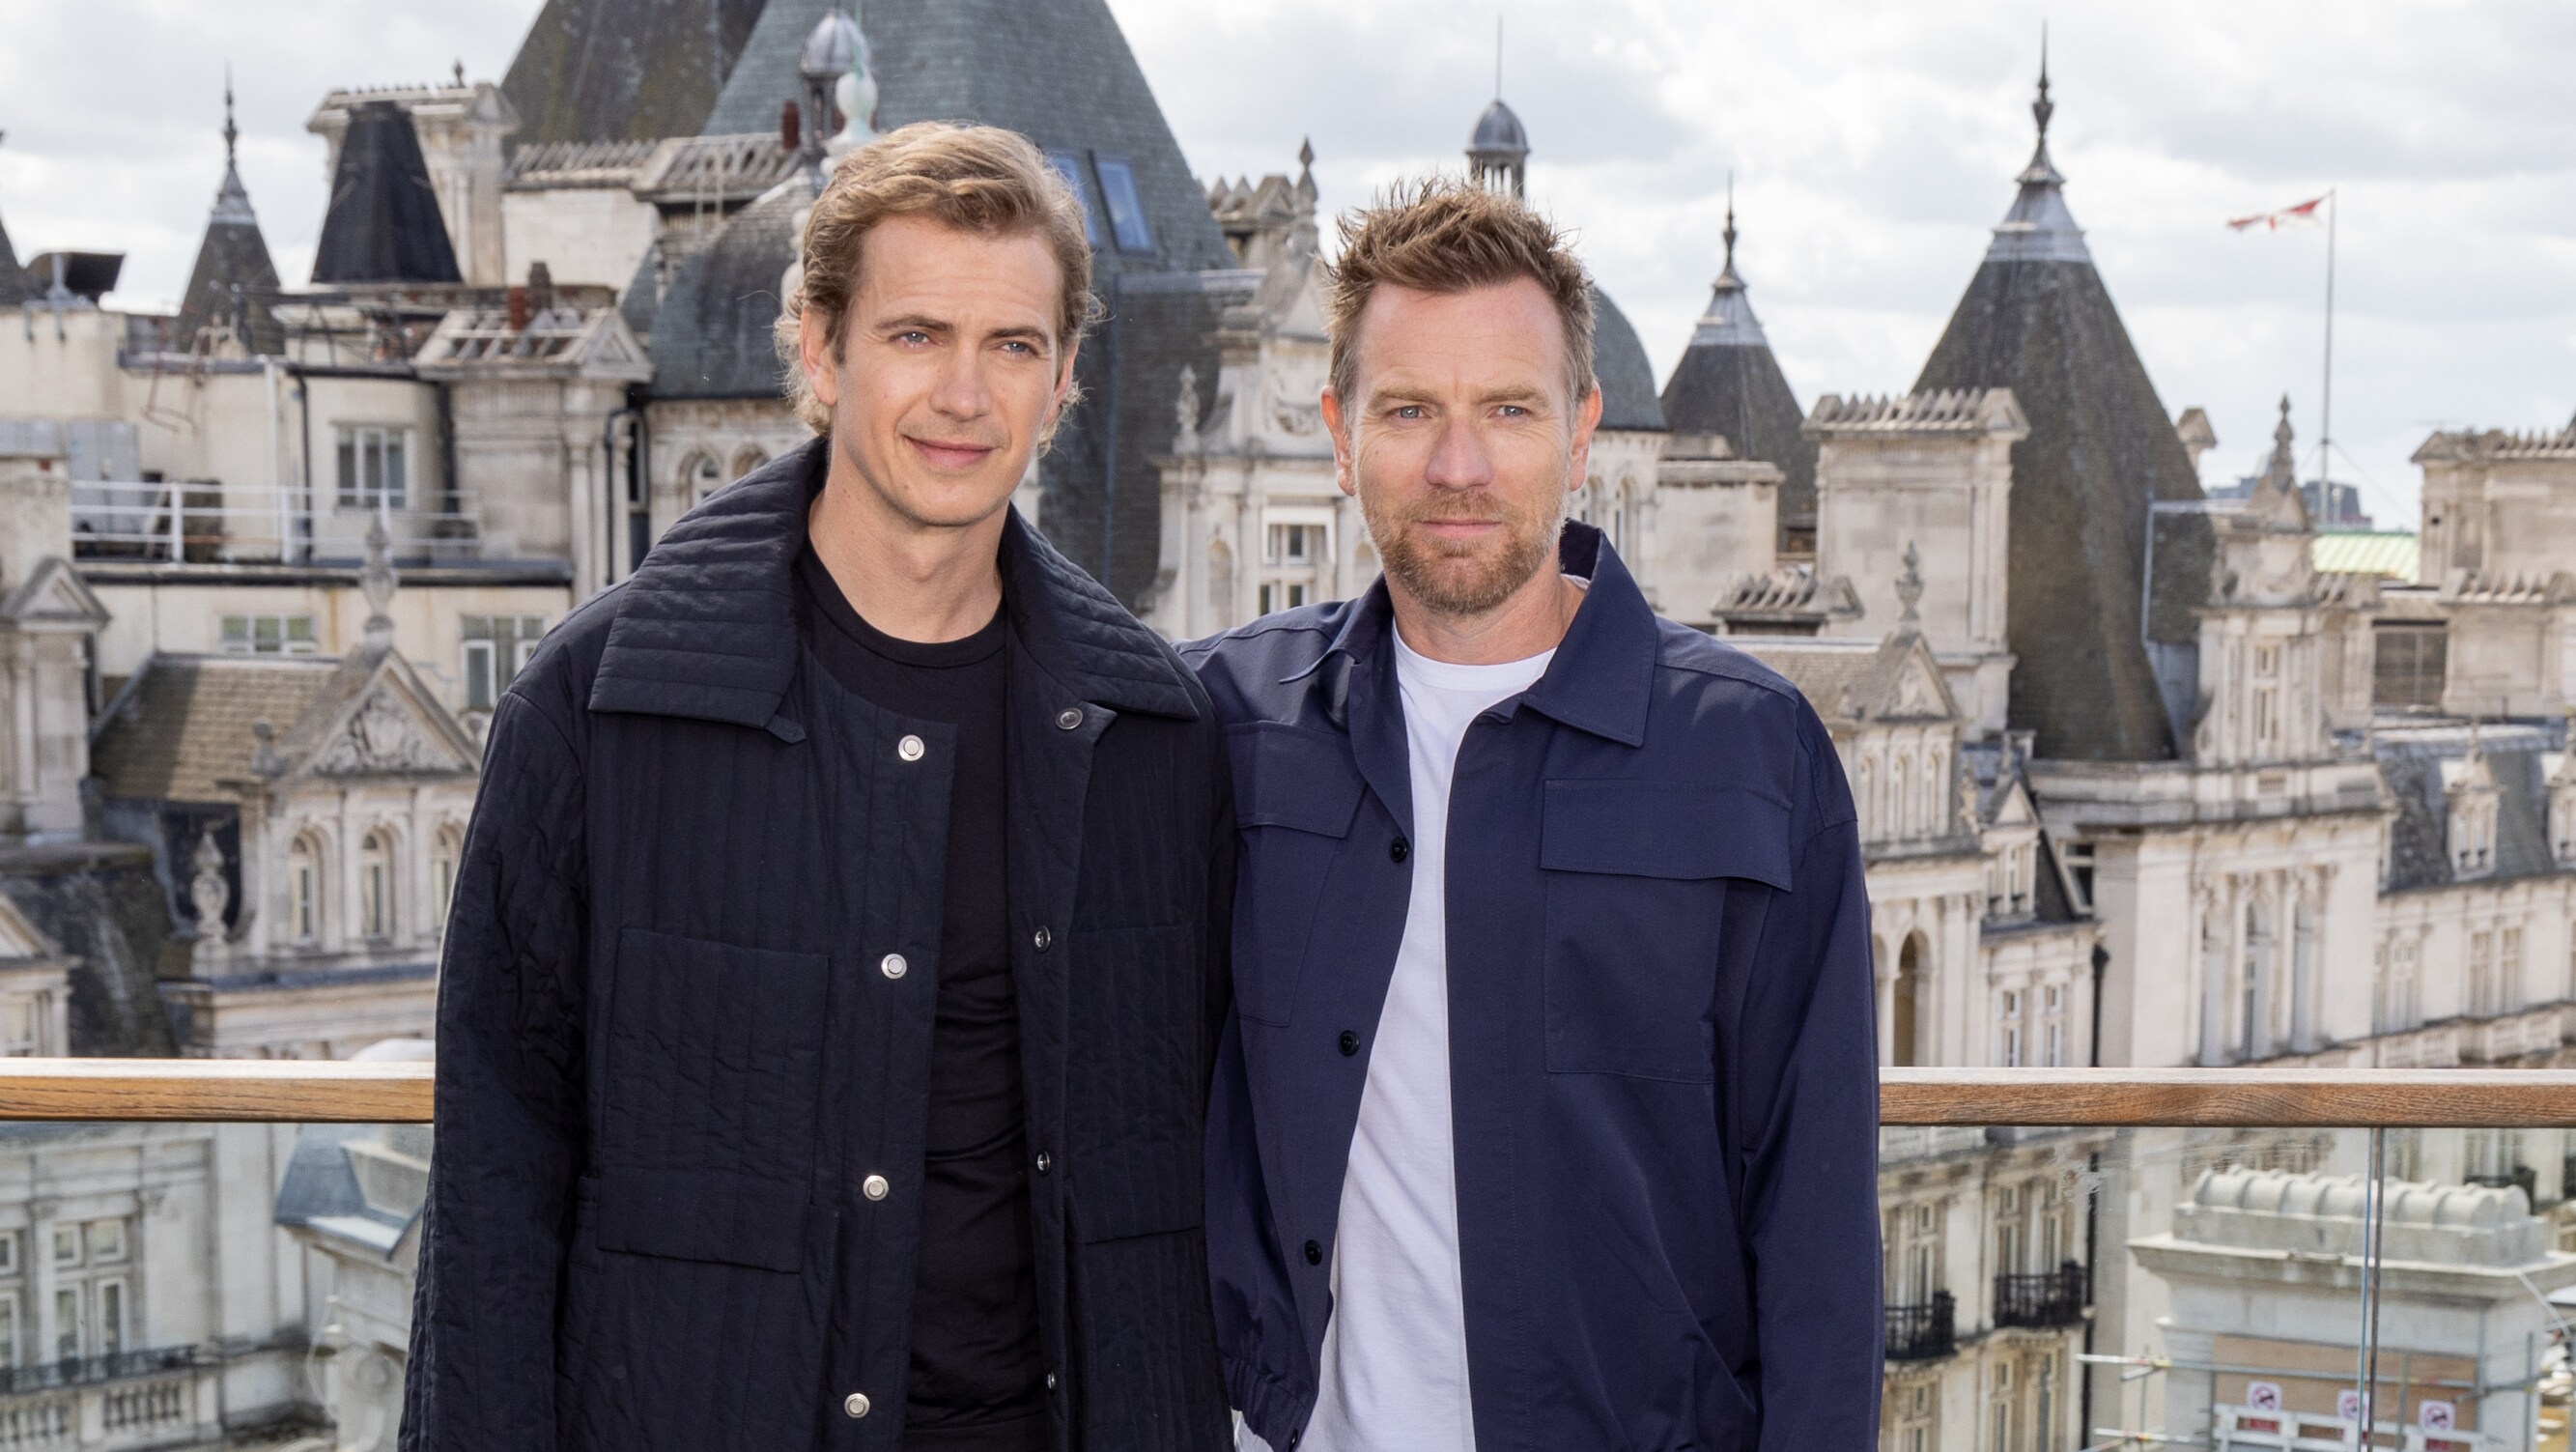 LONDON, ENGLAND - MAY 12:  Hayden Christensen and Ewan McGregor attend the photocall for the new Disney+ limited series "Obi Wan Kenobi" at the Corinthia Hotel on May 12, 2022 in London, England. Obi-Wan Kenobi will be exclusively available on Disney+ from May 27. (Photo by StillMoving.net for Disney)